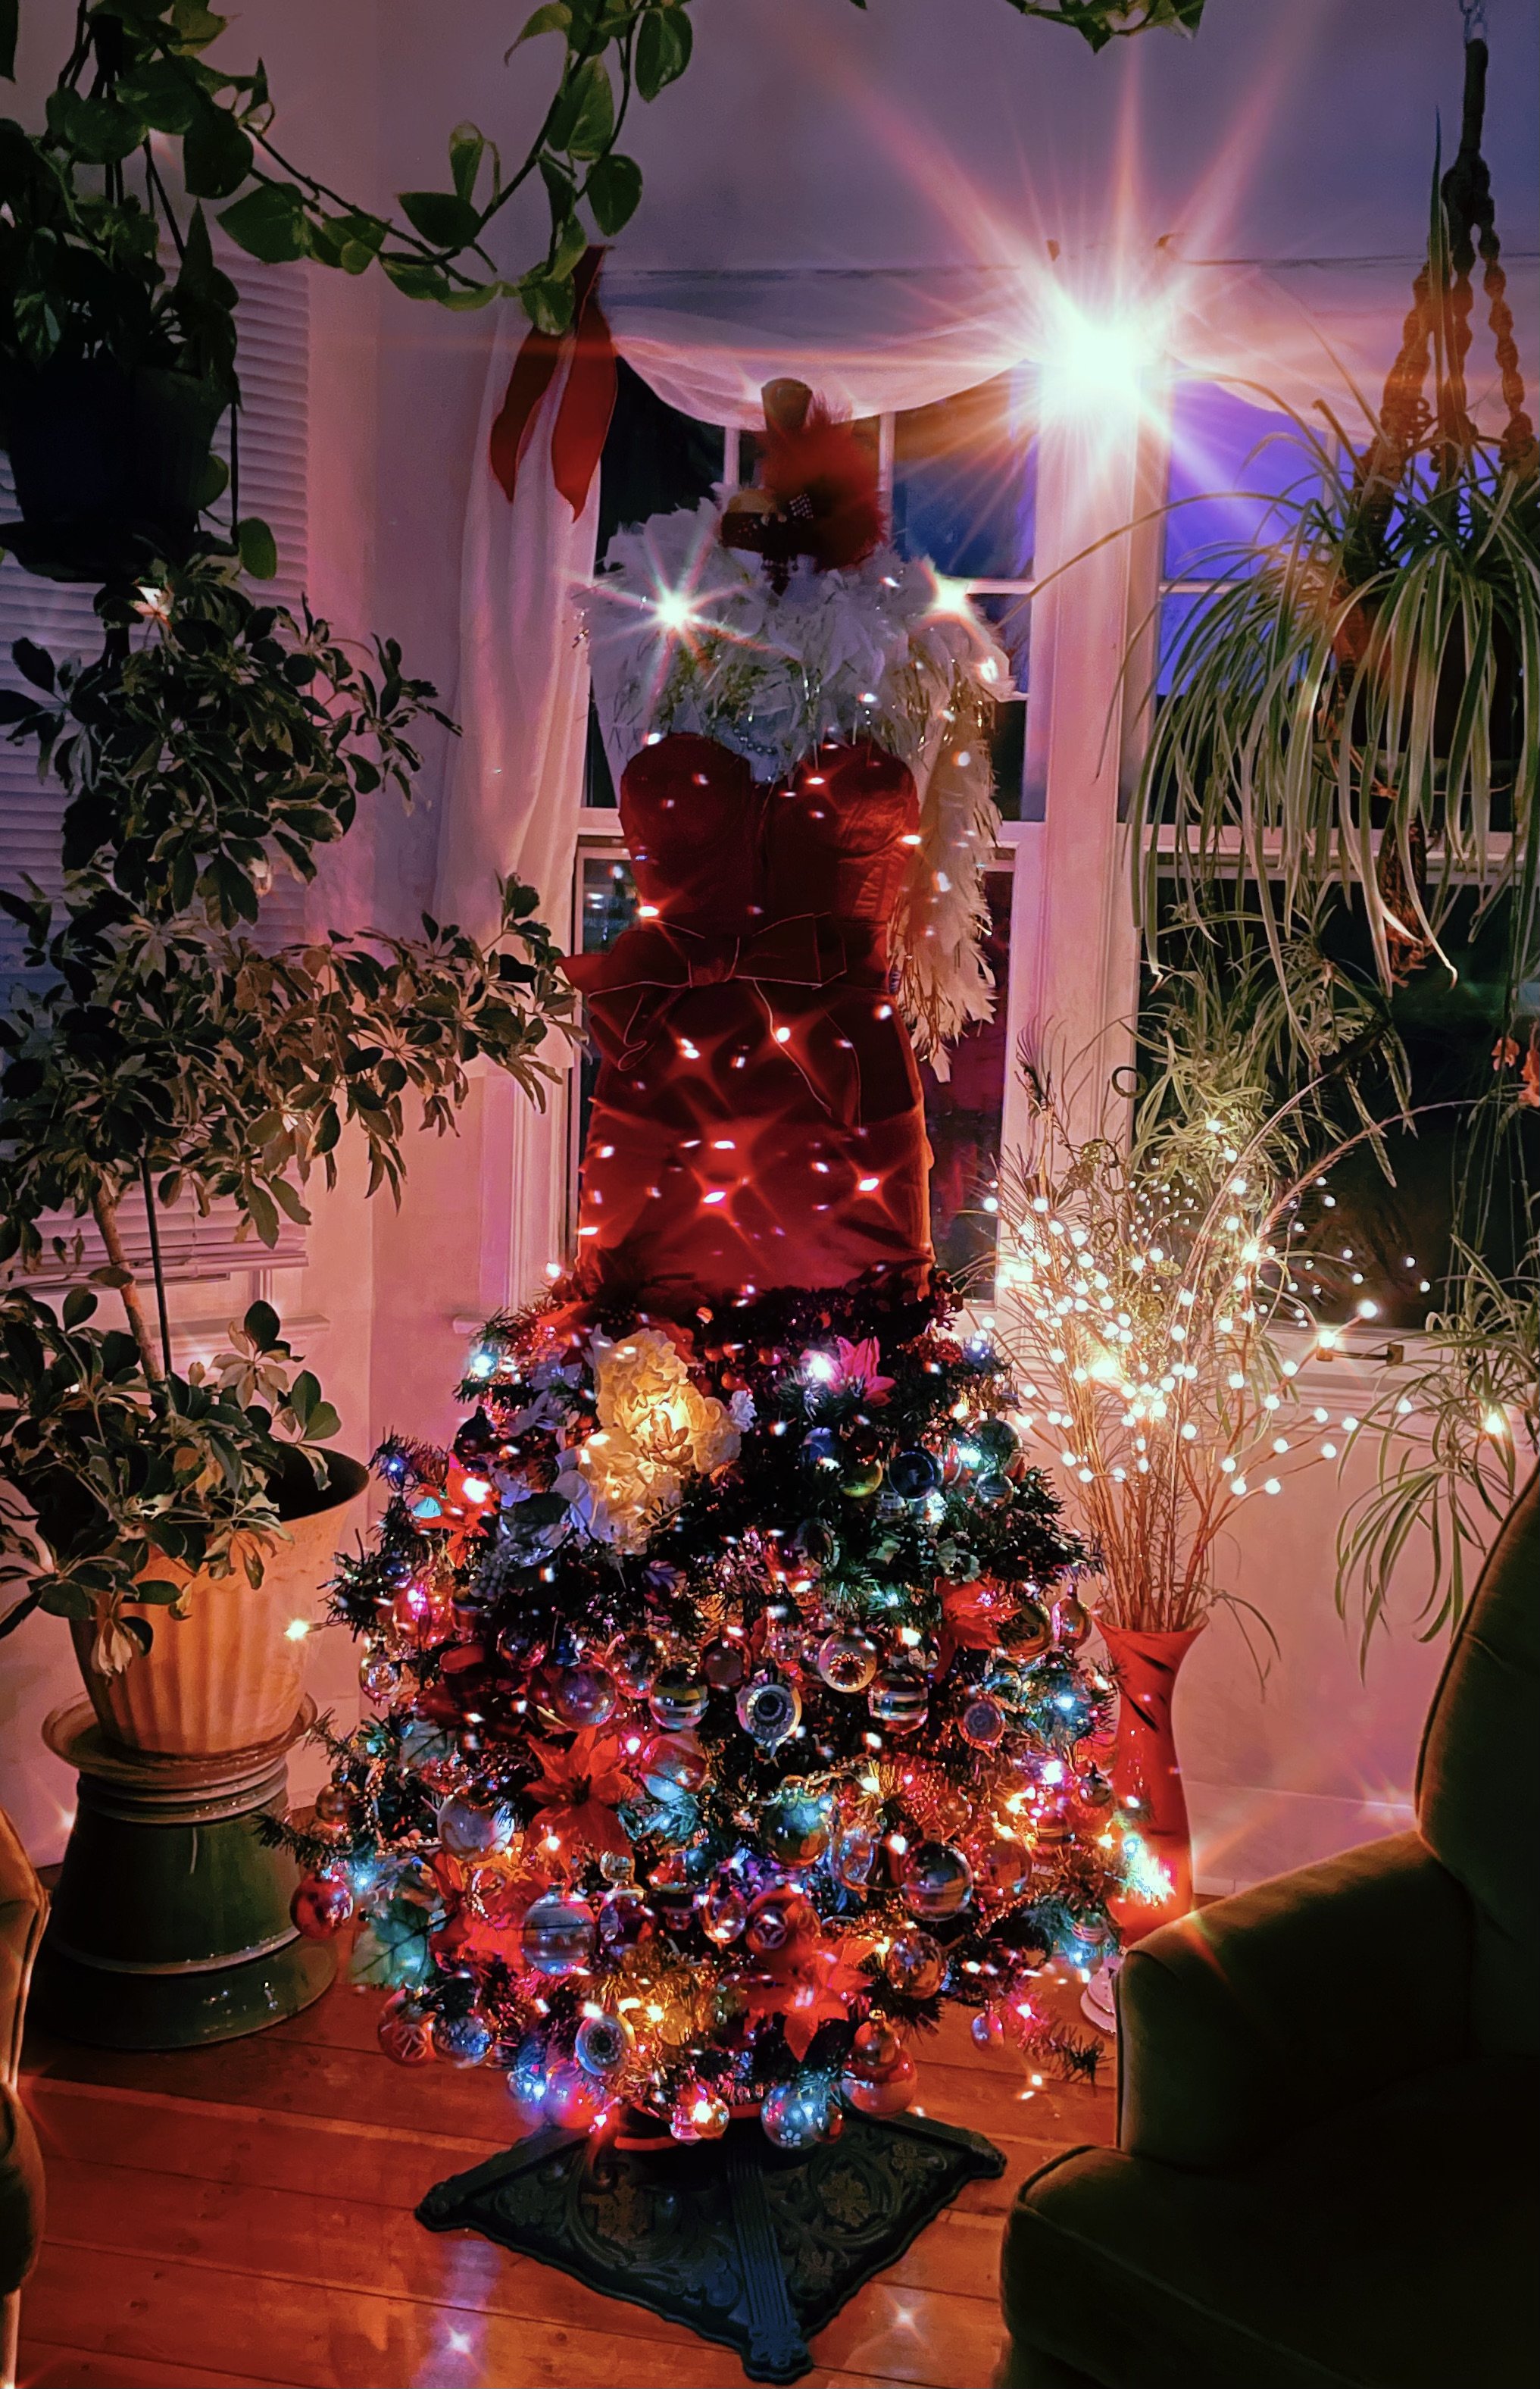 Christmas Countdown 3 ; Christmas tree # 23 - Mannequins and Motors